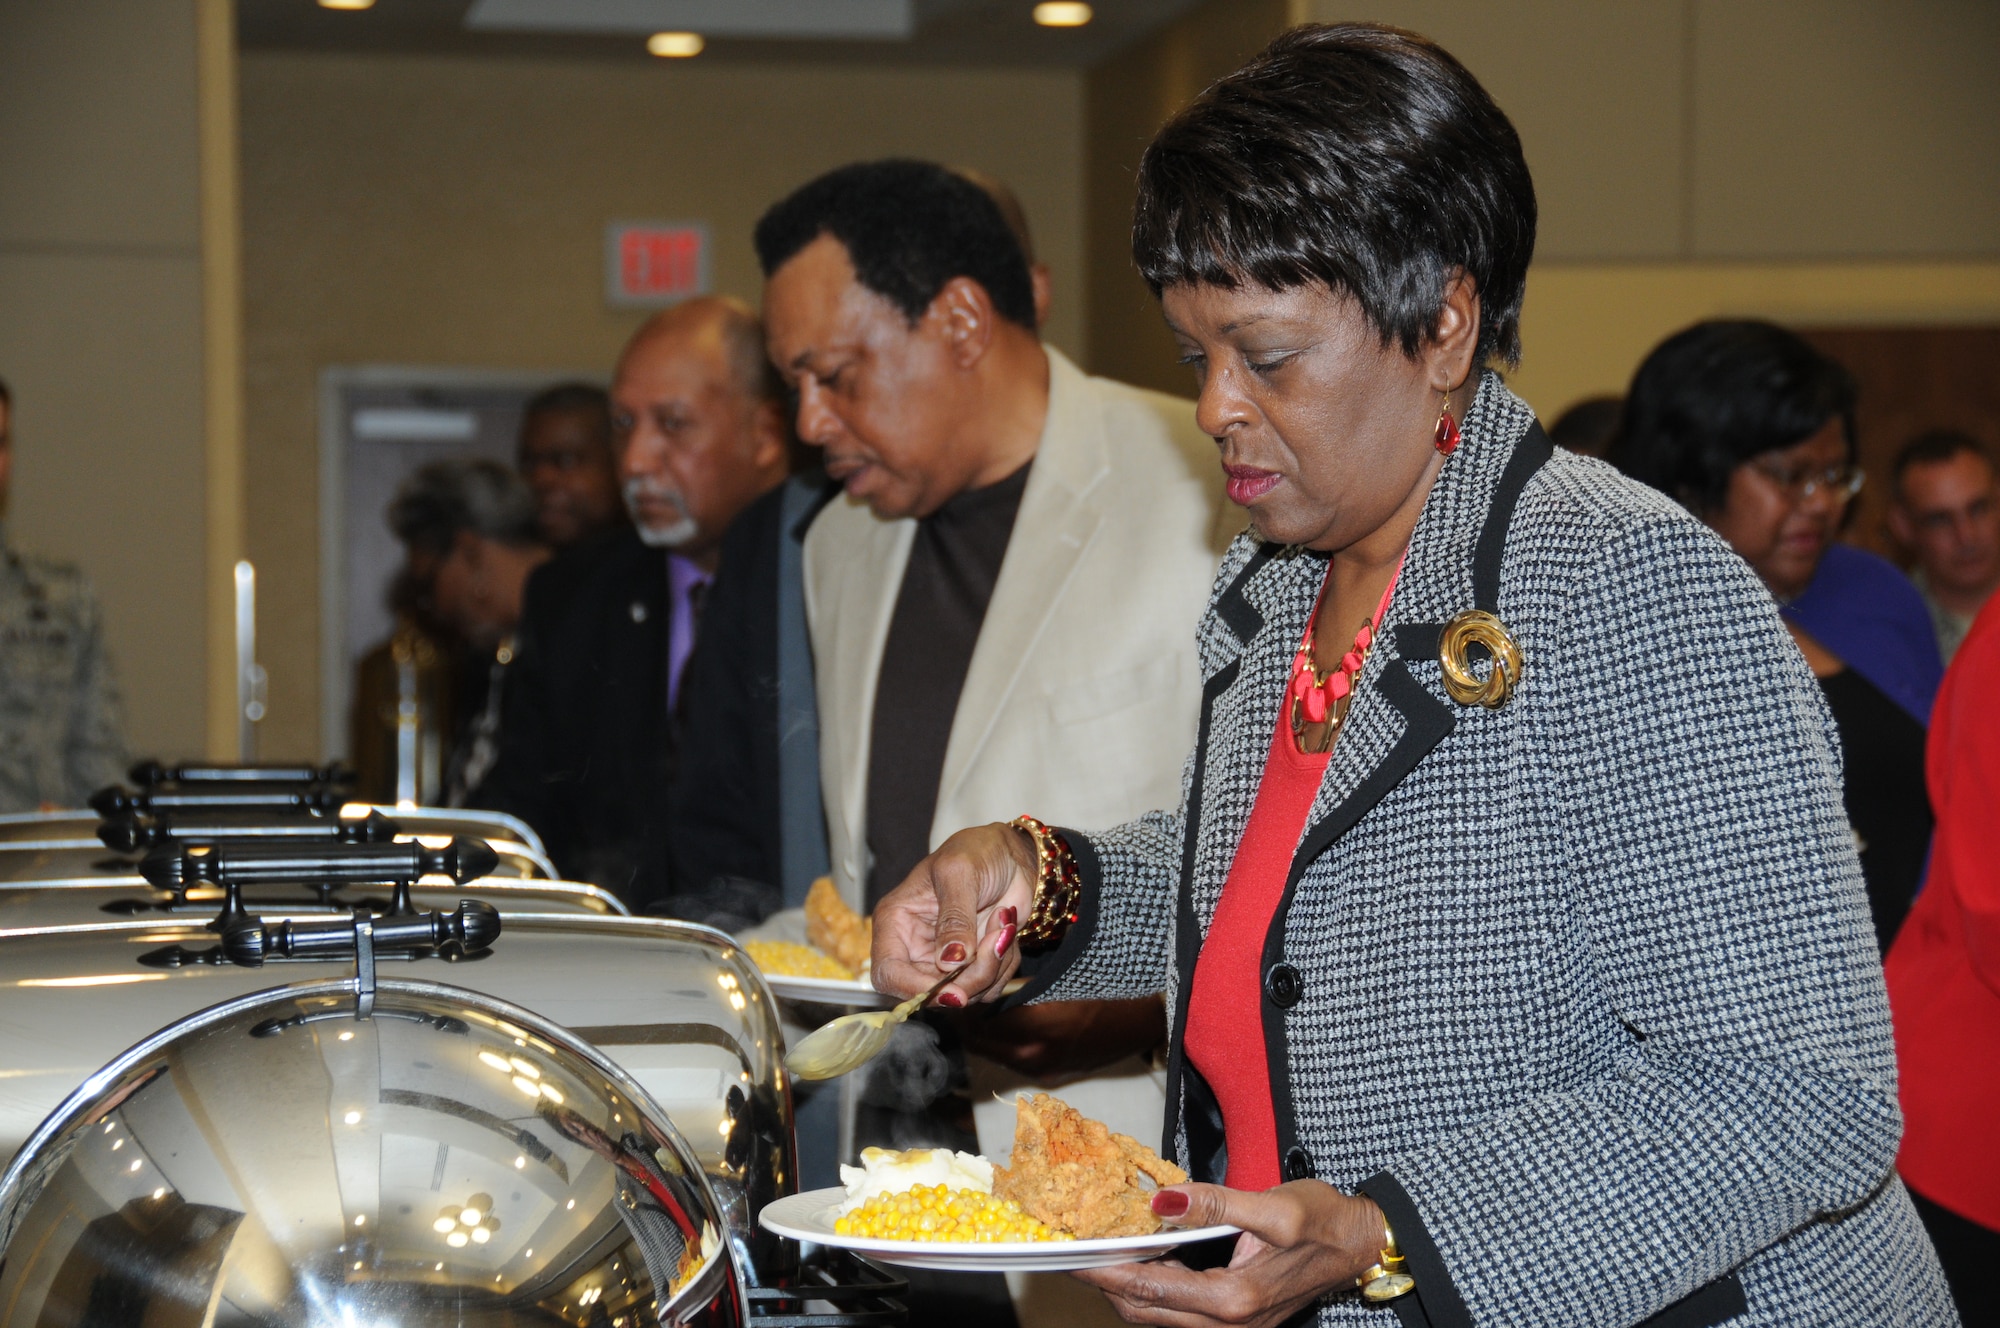 Linda Brundidge, 81st Medical Support Squadron, and her husband Marvin, retired, go through the buffet line during the Black History Month luncheon, Feb. 2, 2012, at the Bay Breeze Event Center, Keesler Air Force Base, Miss.  The luncheon was hosted by the African American Heritage Committee and the guest speaker for the event was Sally-Ann Roberts.  (U.S. Air Force photo by Kemberly Groue)